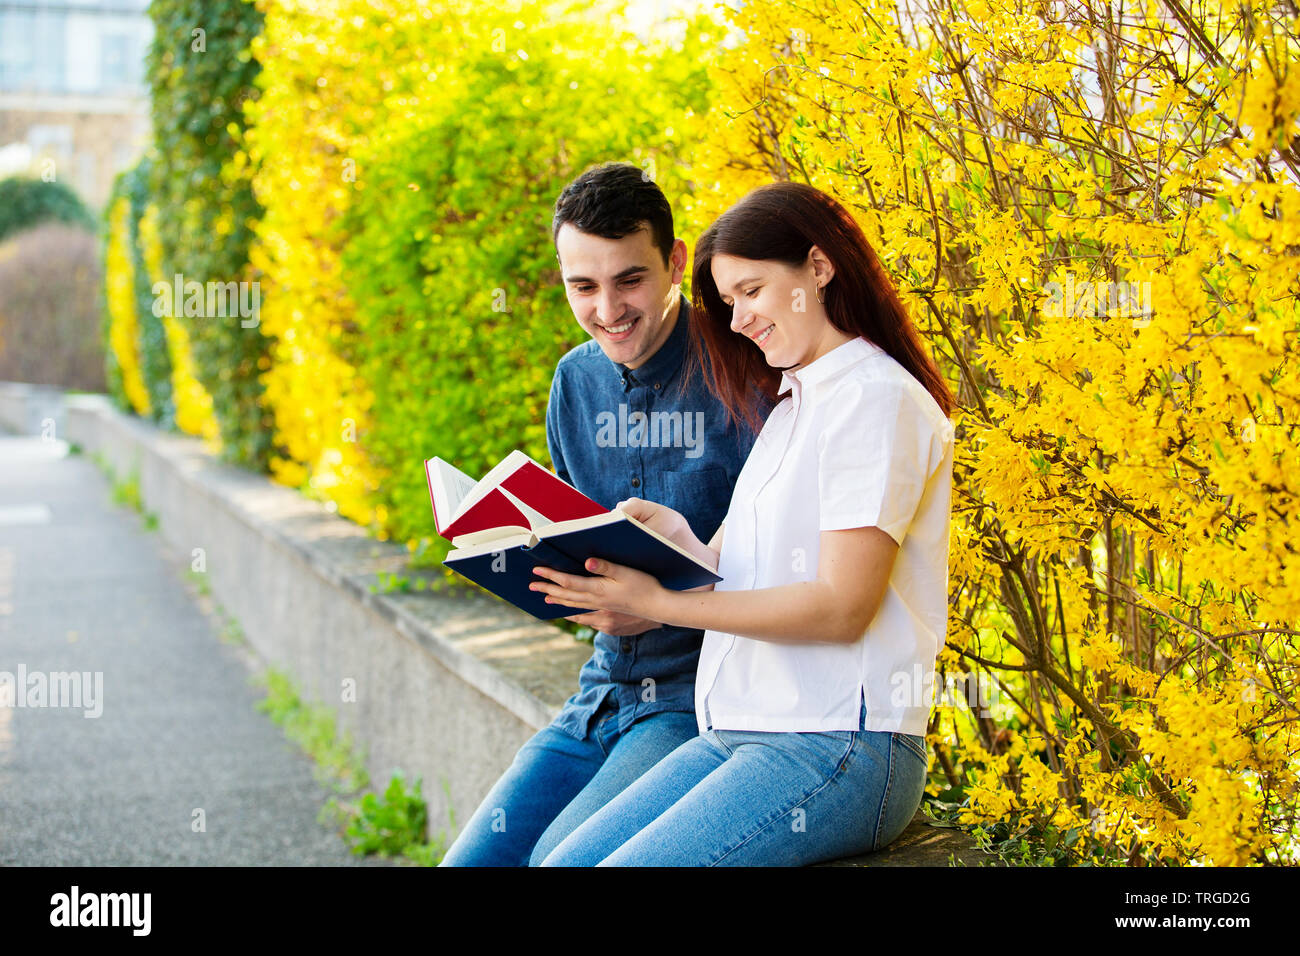 Students learning for exam together in a city park. Students Brainstorming Meeting  learning for exam. Fast learning concept. Students Teamwork. Stock Photo